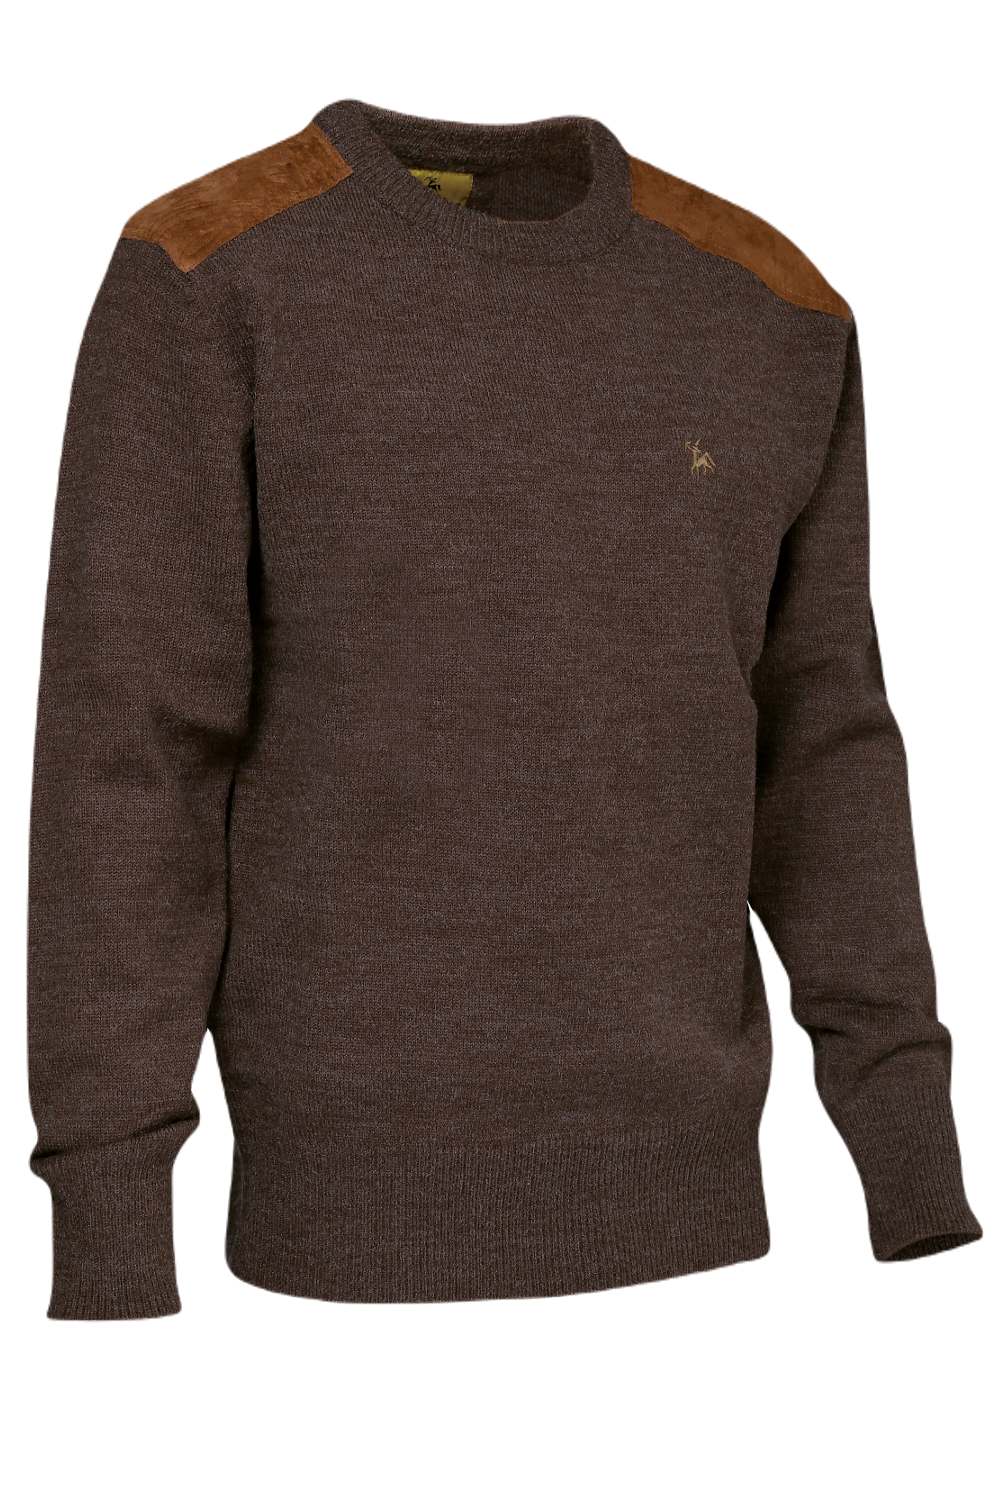 Verney Carron Fox Rond Sweater in Brown